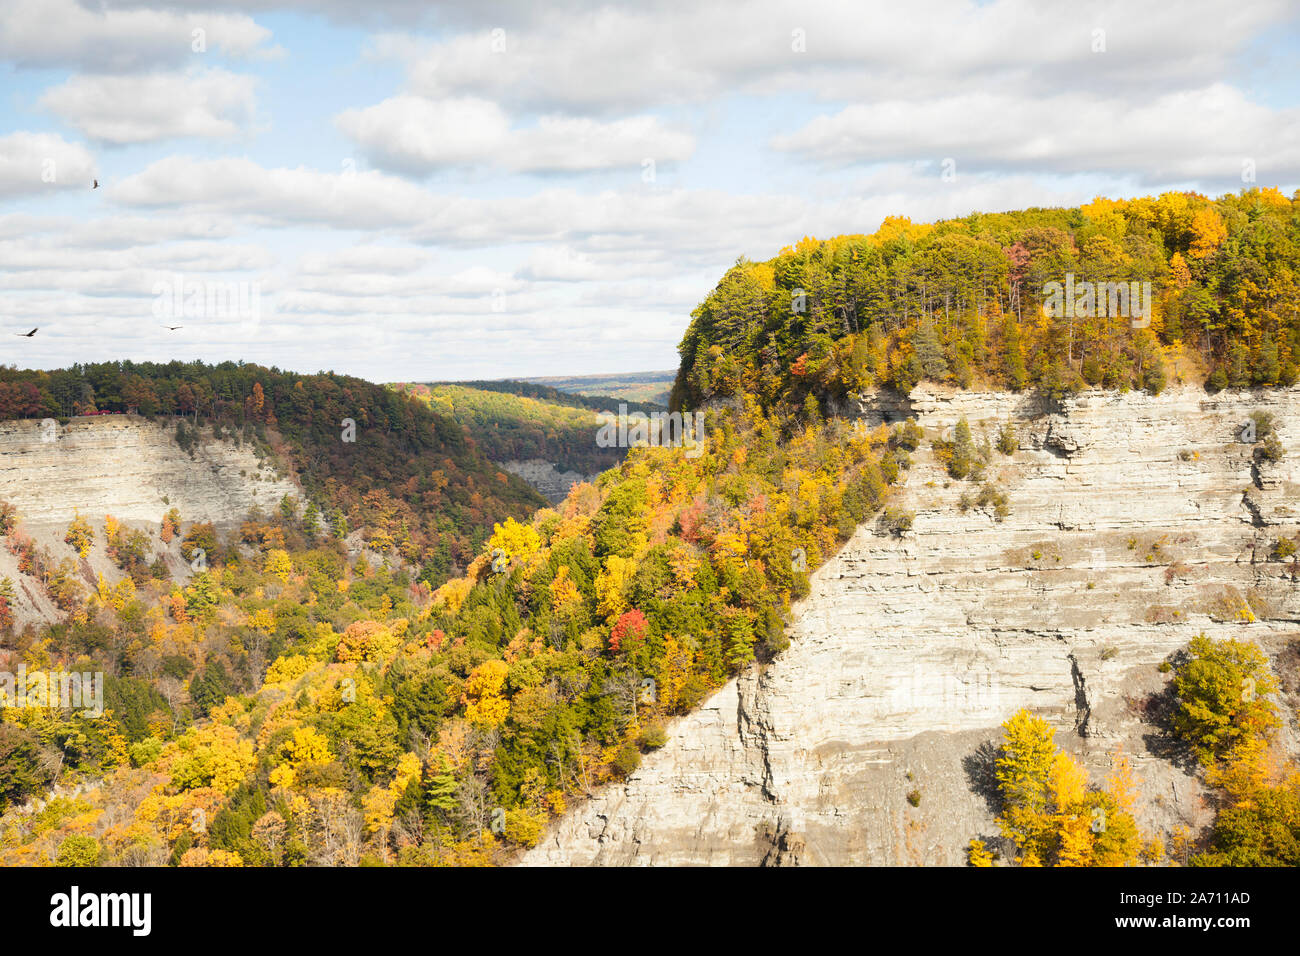 Autumn leaves and scenery at Letchworth State Park in upstate New York Stock Photo